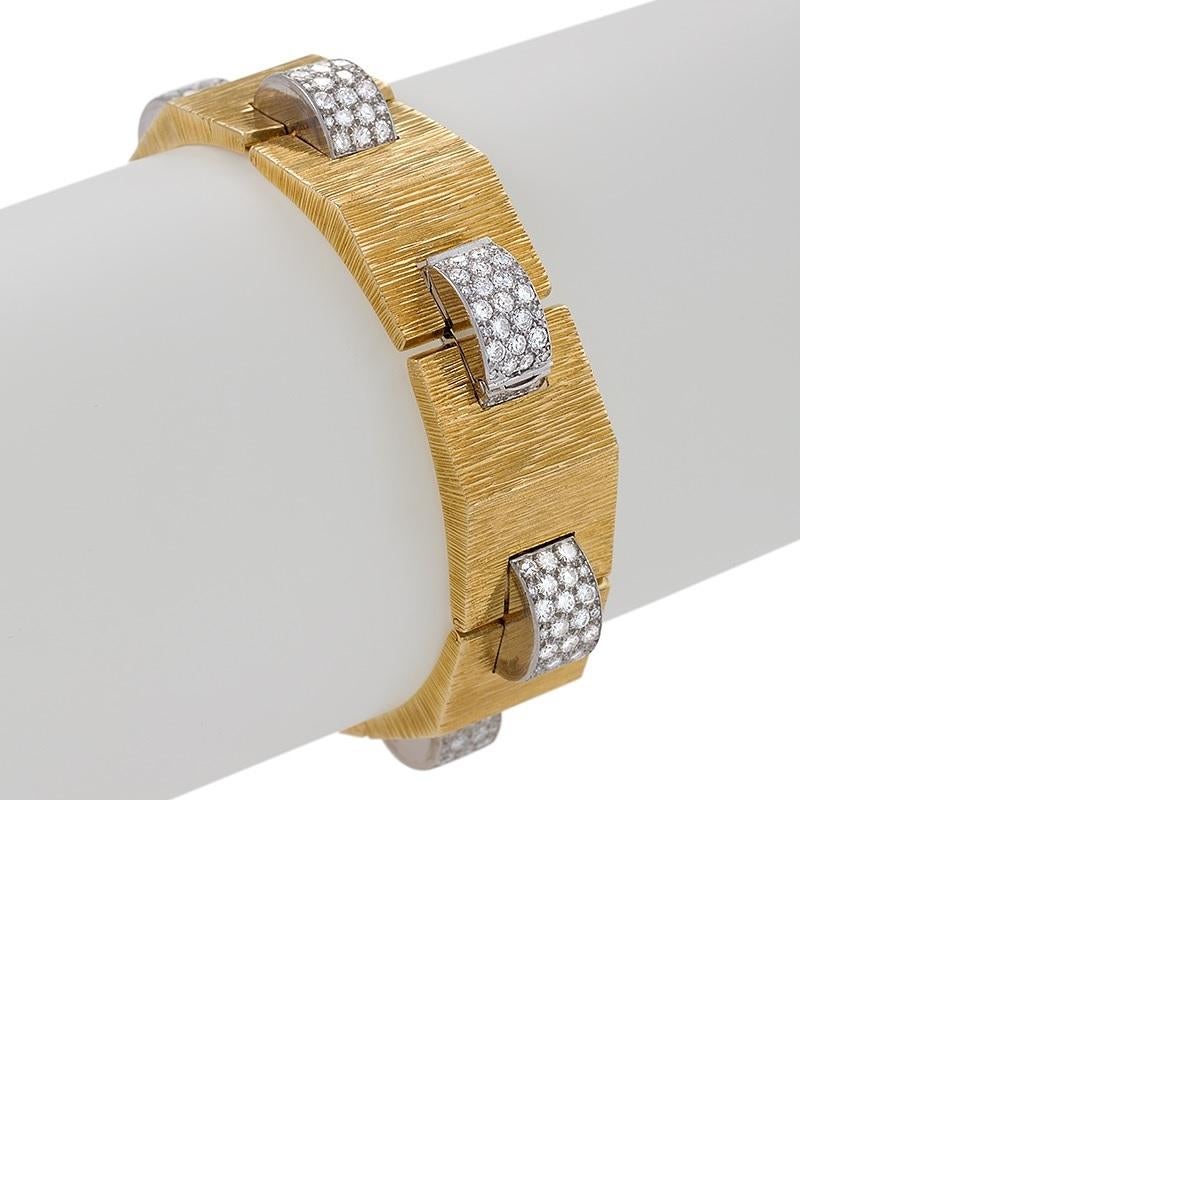 Dating from the 1940s, this striking “tank” bracelet in gold, platinum, and over four carats of diamonds is by Cartier London. Designed as a stylized version of the tank track bracelets so popular in the 1930s, it is composed of arched, striated